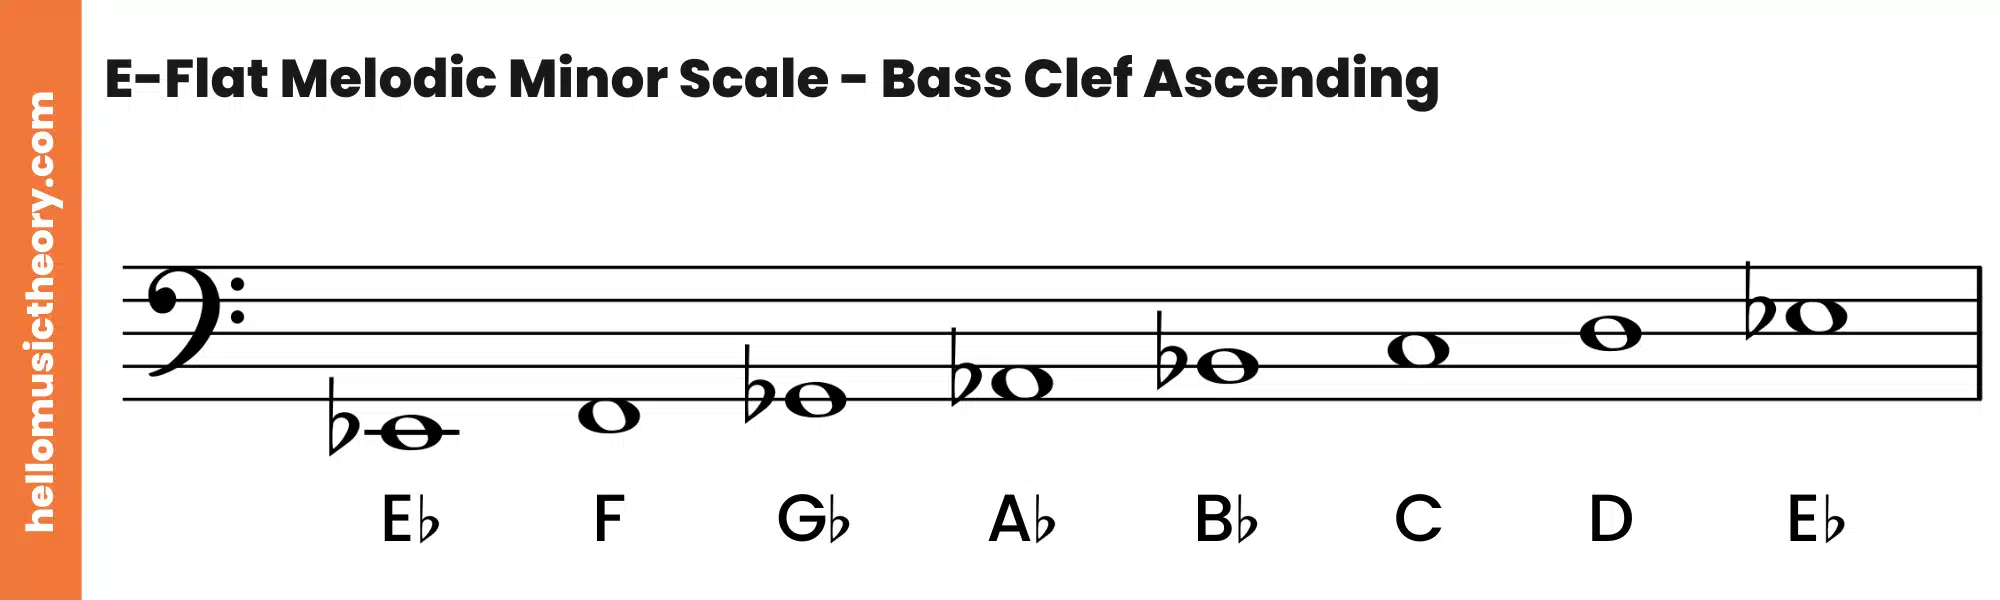 E-Flat Melodic Minor Scale Bass Clef Ascending